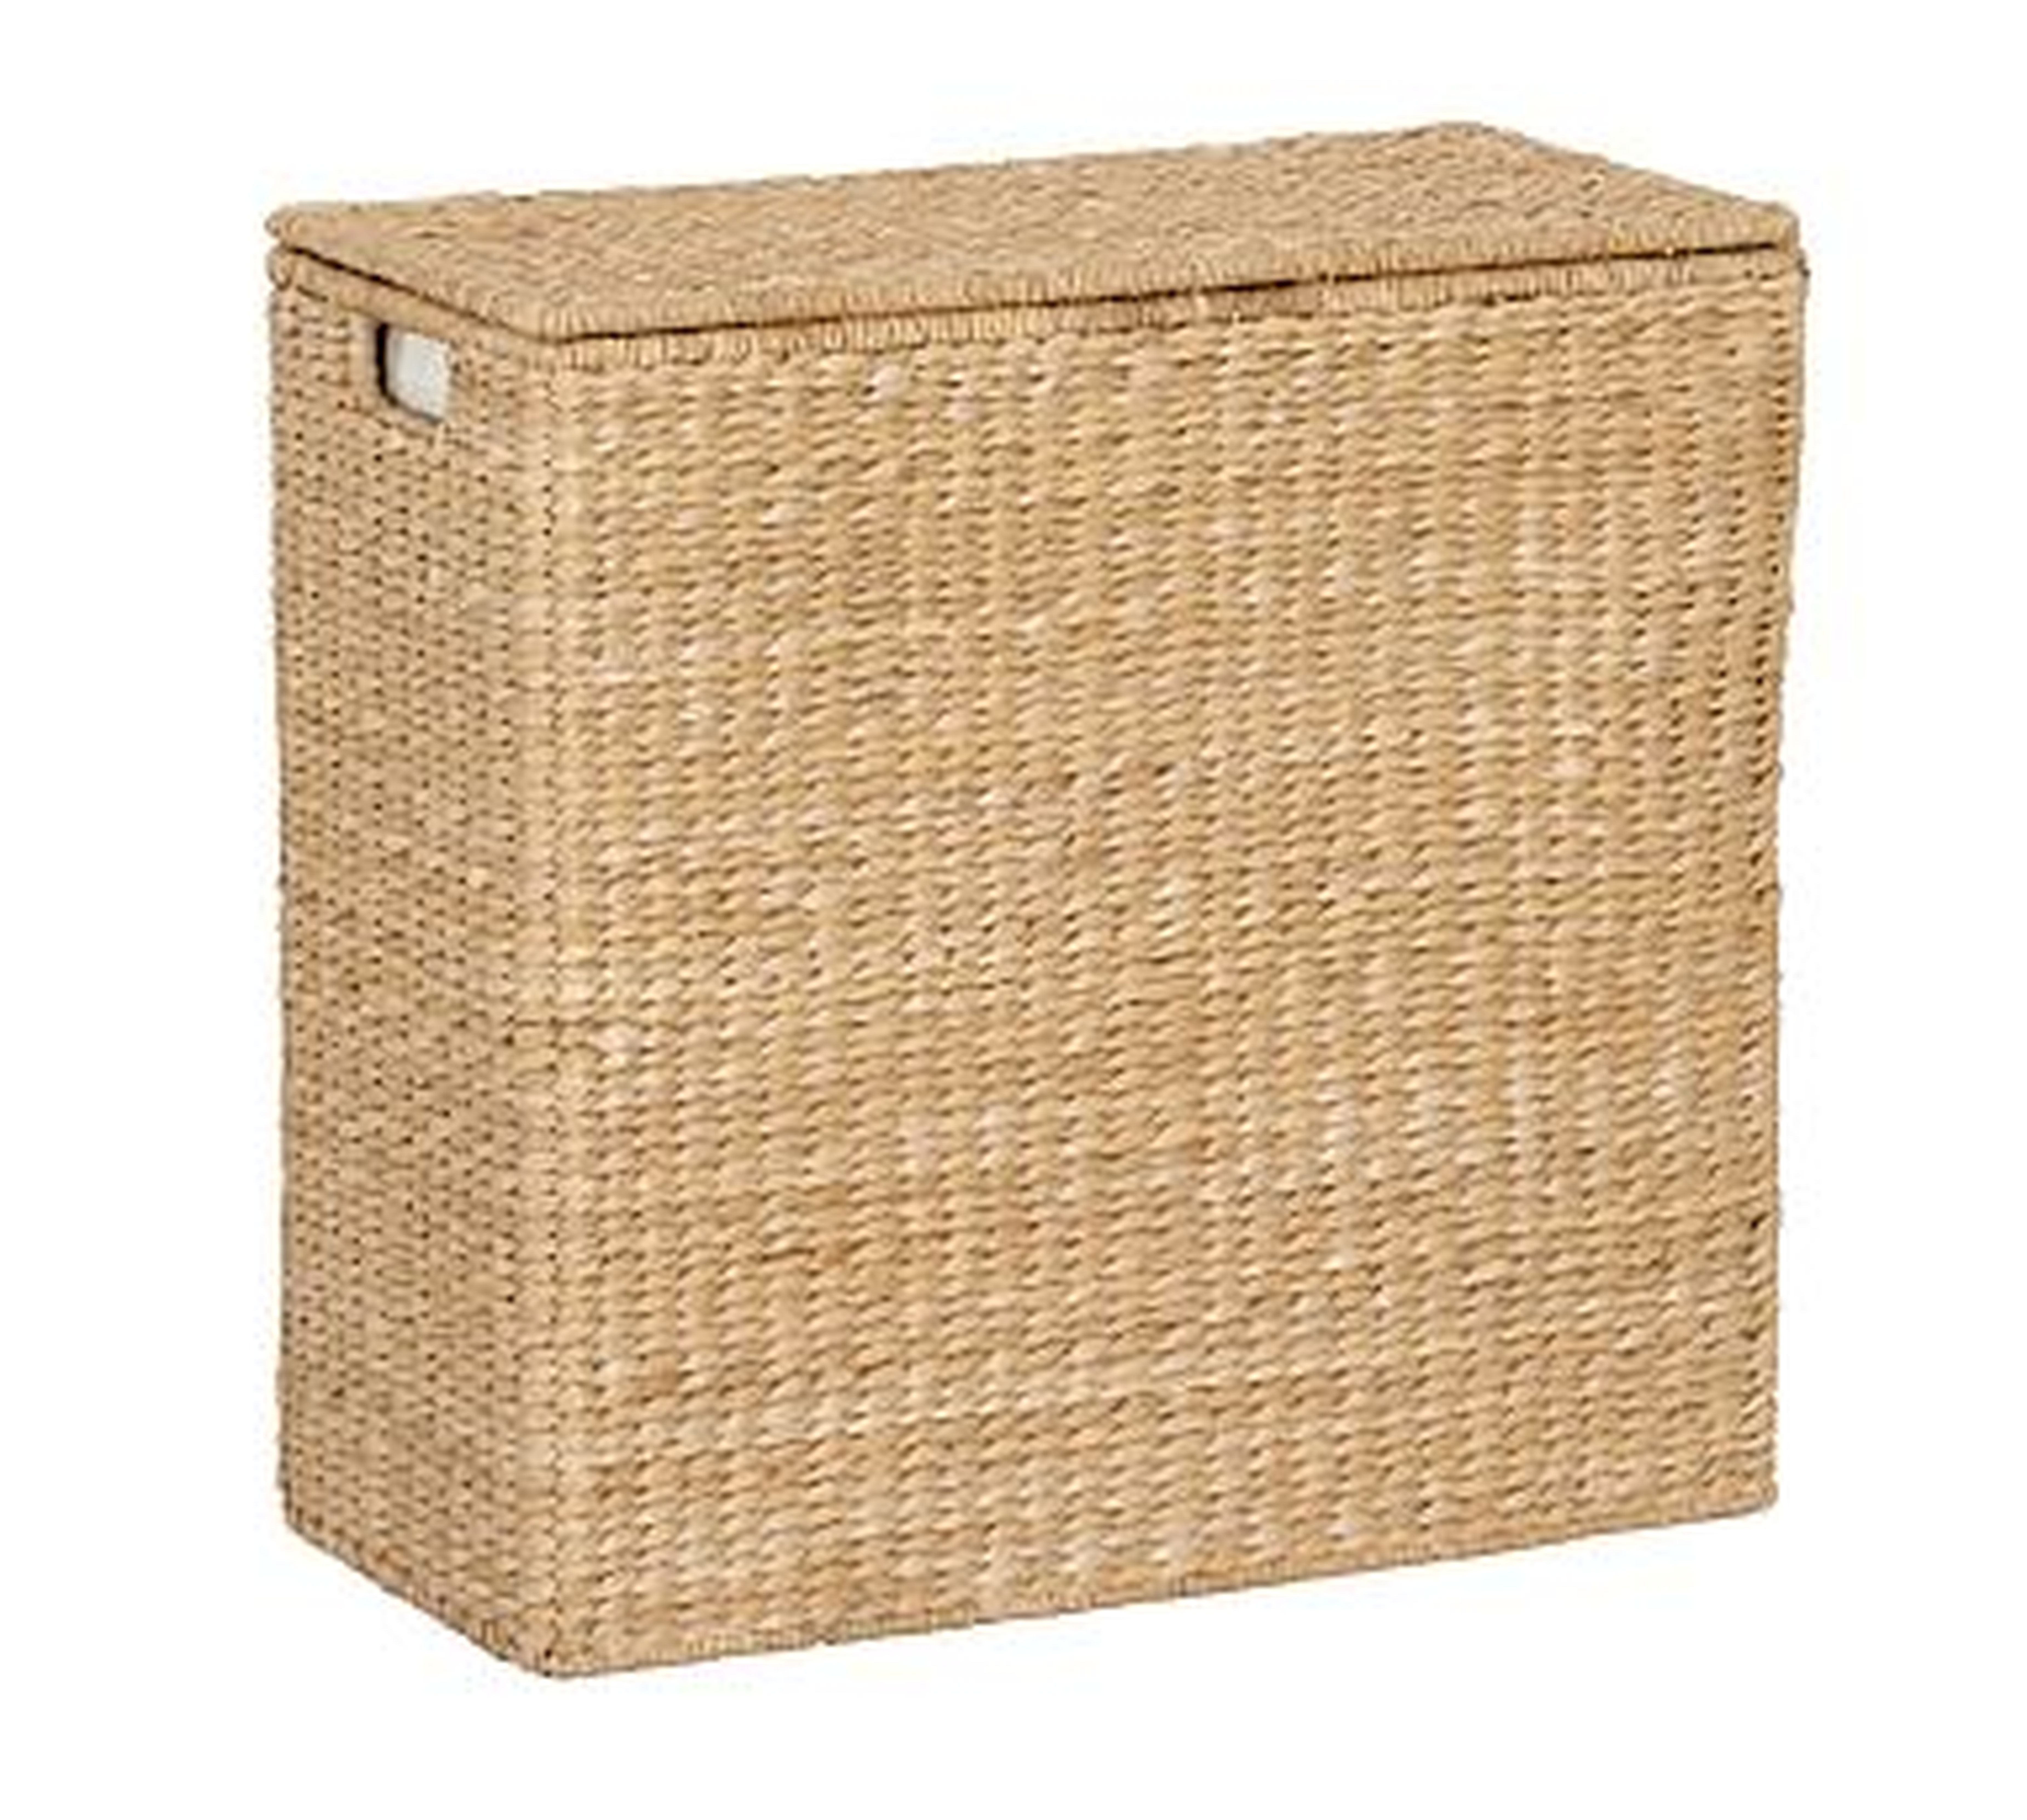 Savannah Seagrass Handcrafted Divided Hamper with Liner - Pottery Barn